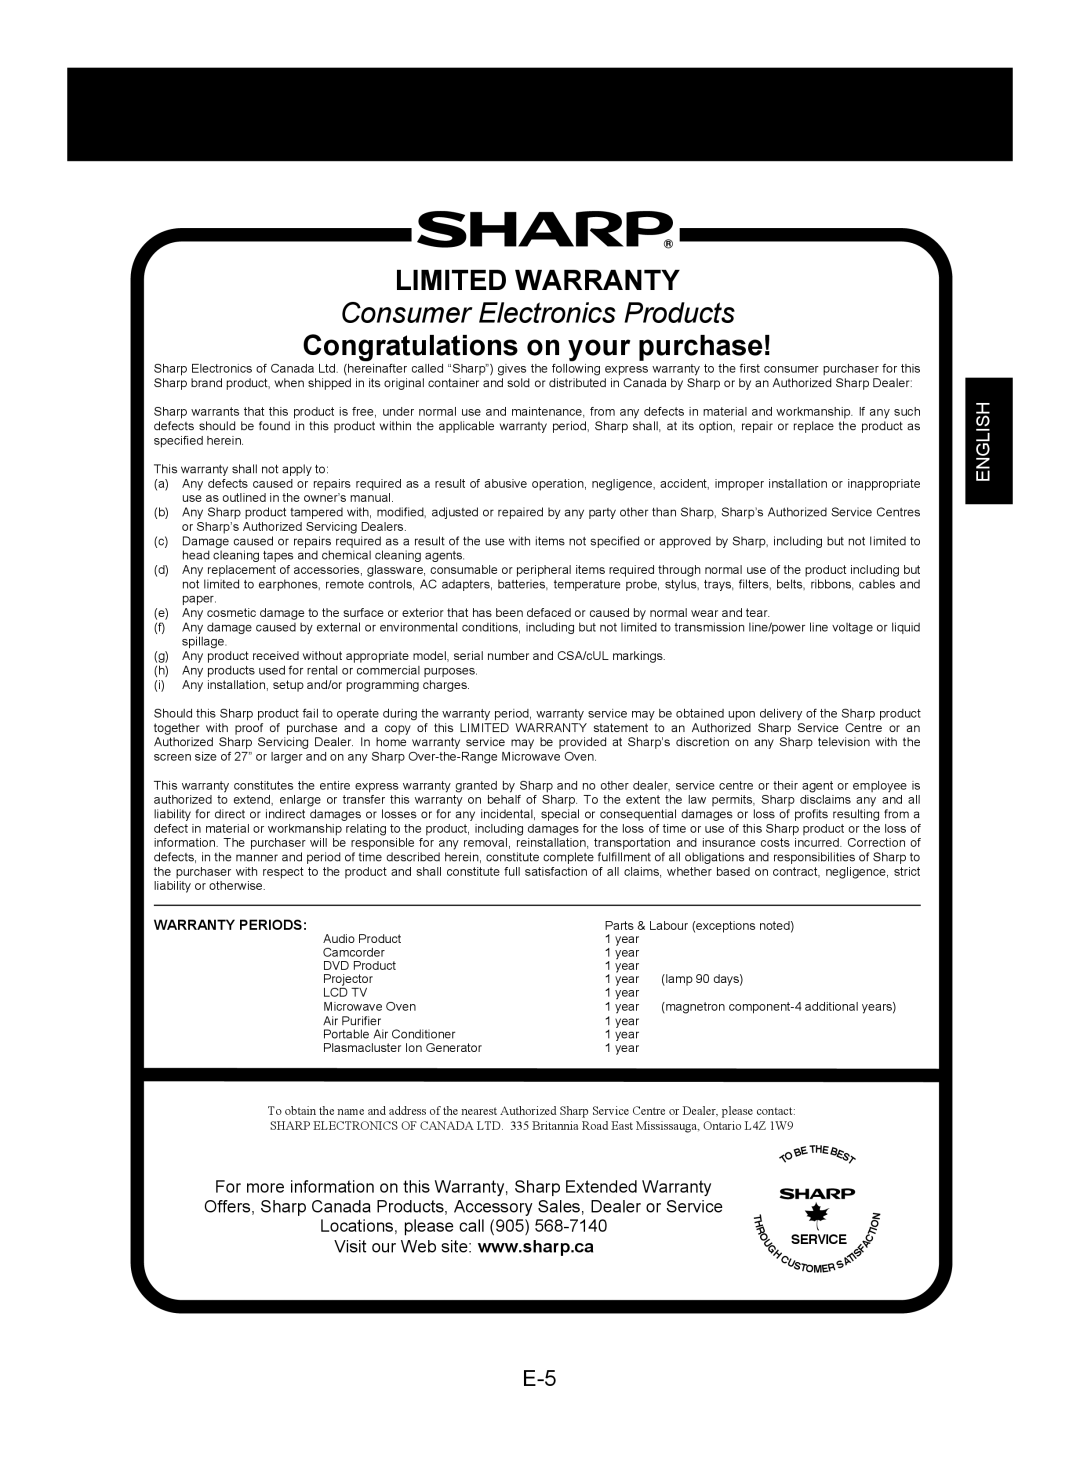 Sharp KC-830U Limited Warranty, Consumer Electronics Products, Congratulations on your purchase, English, Warranty Periods 